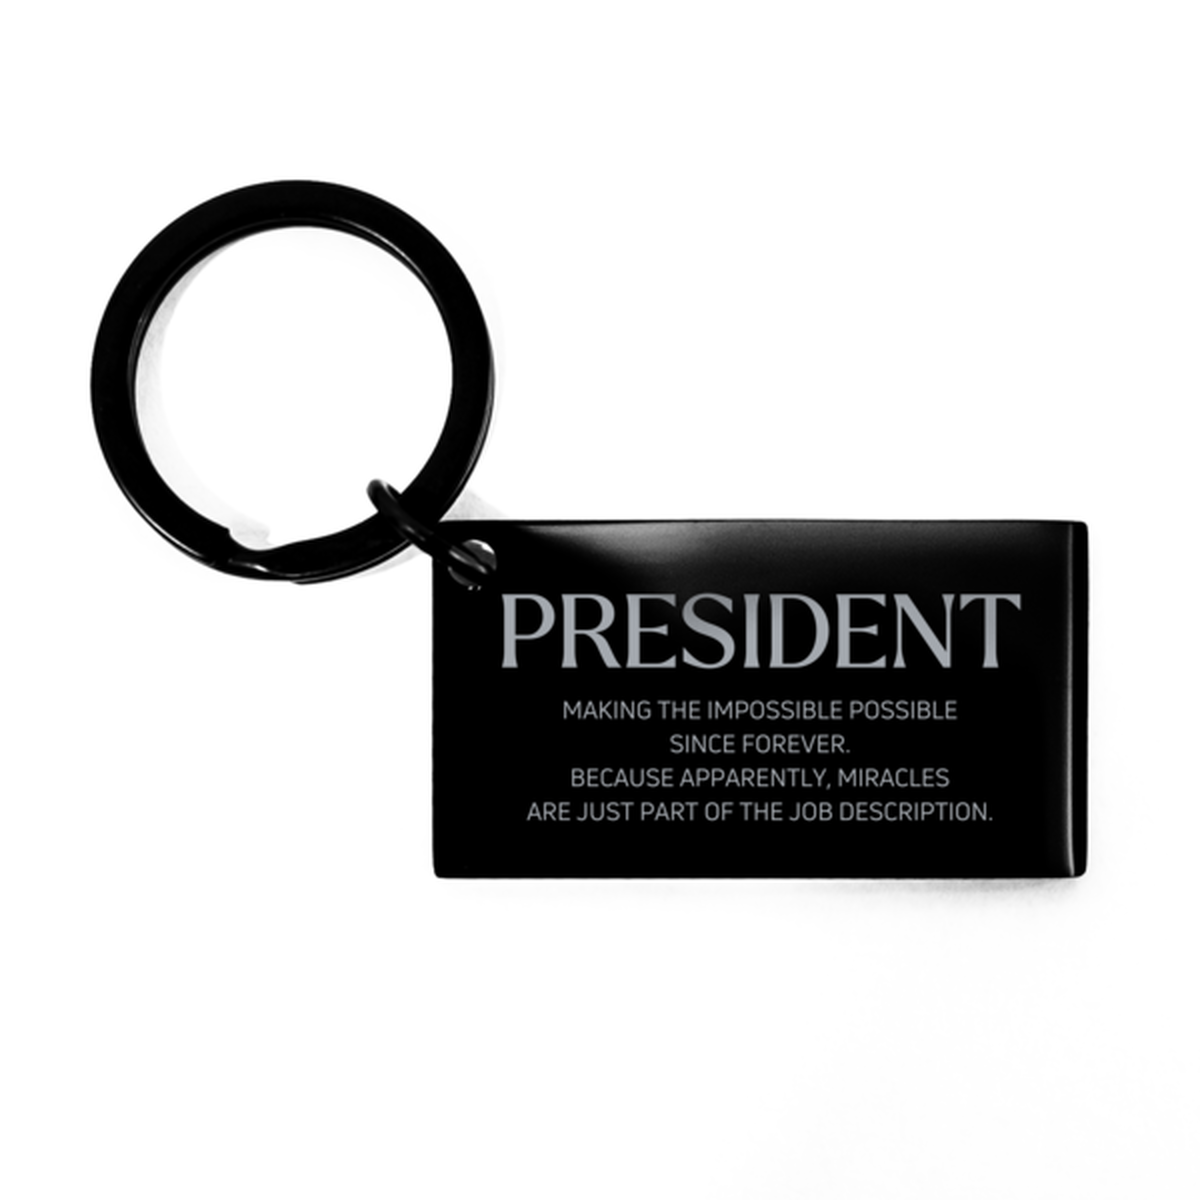 Funny President Gifts, Miracles are just part of the job description, Inspirational Birthday Keychain For President, Men, Women, Coworkers, Friends, Boss